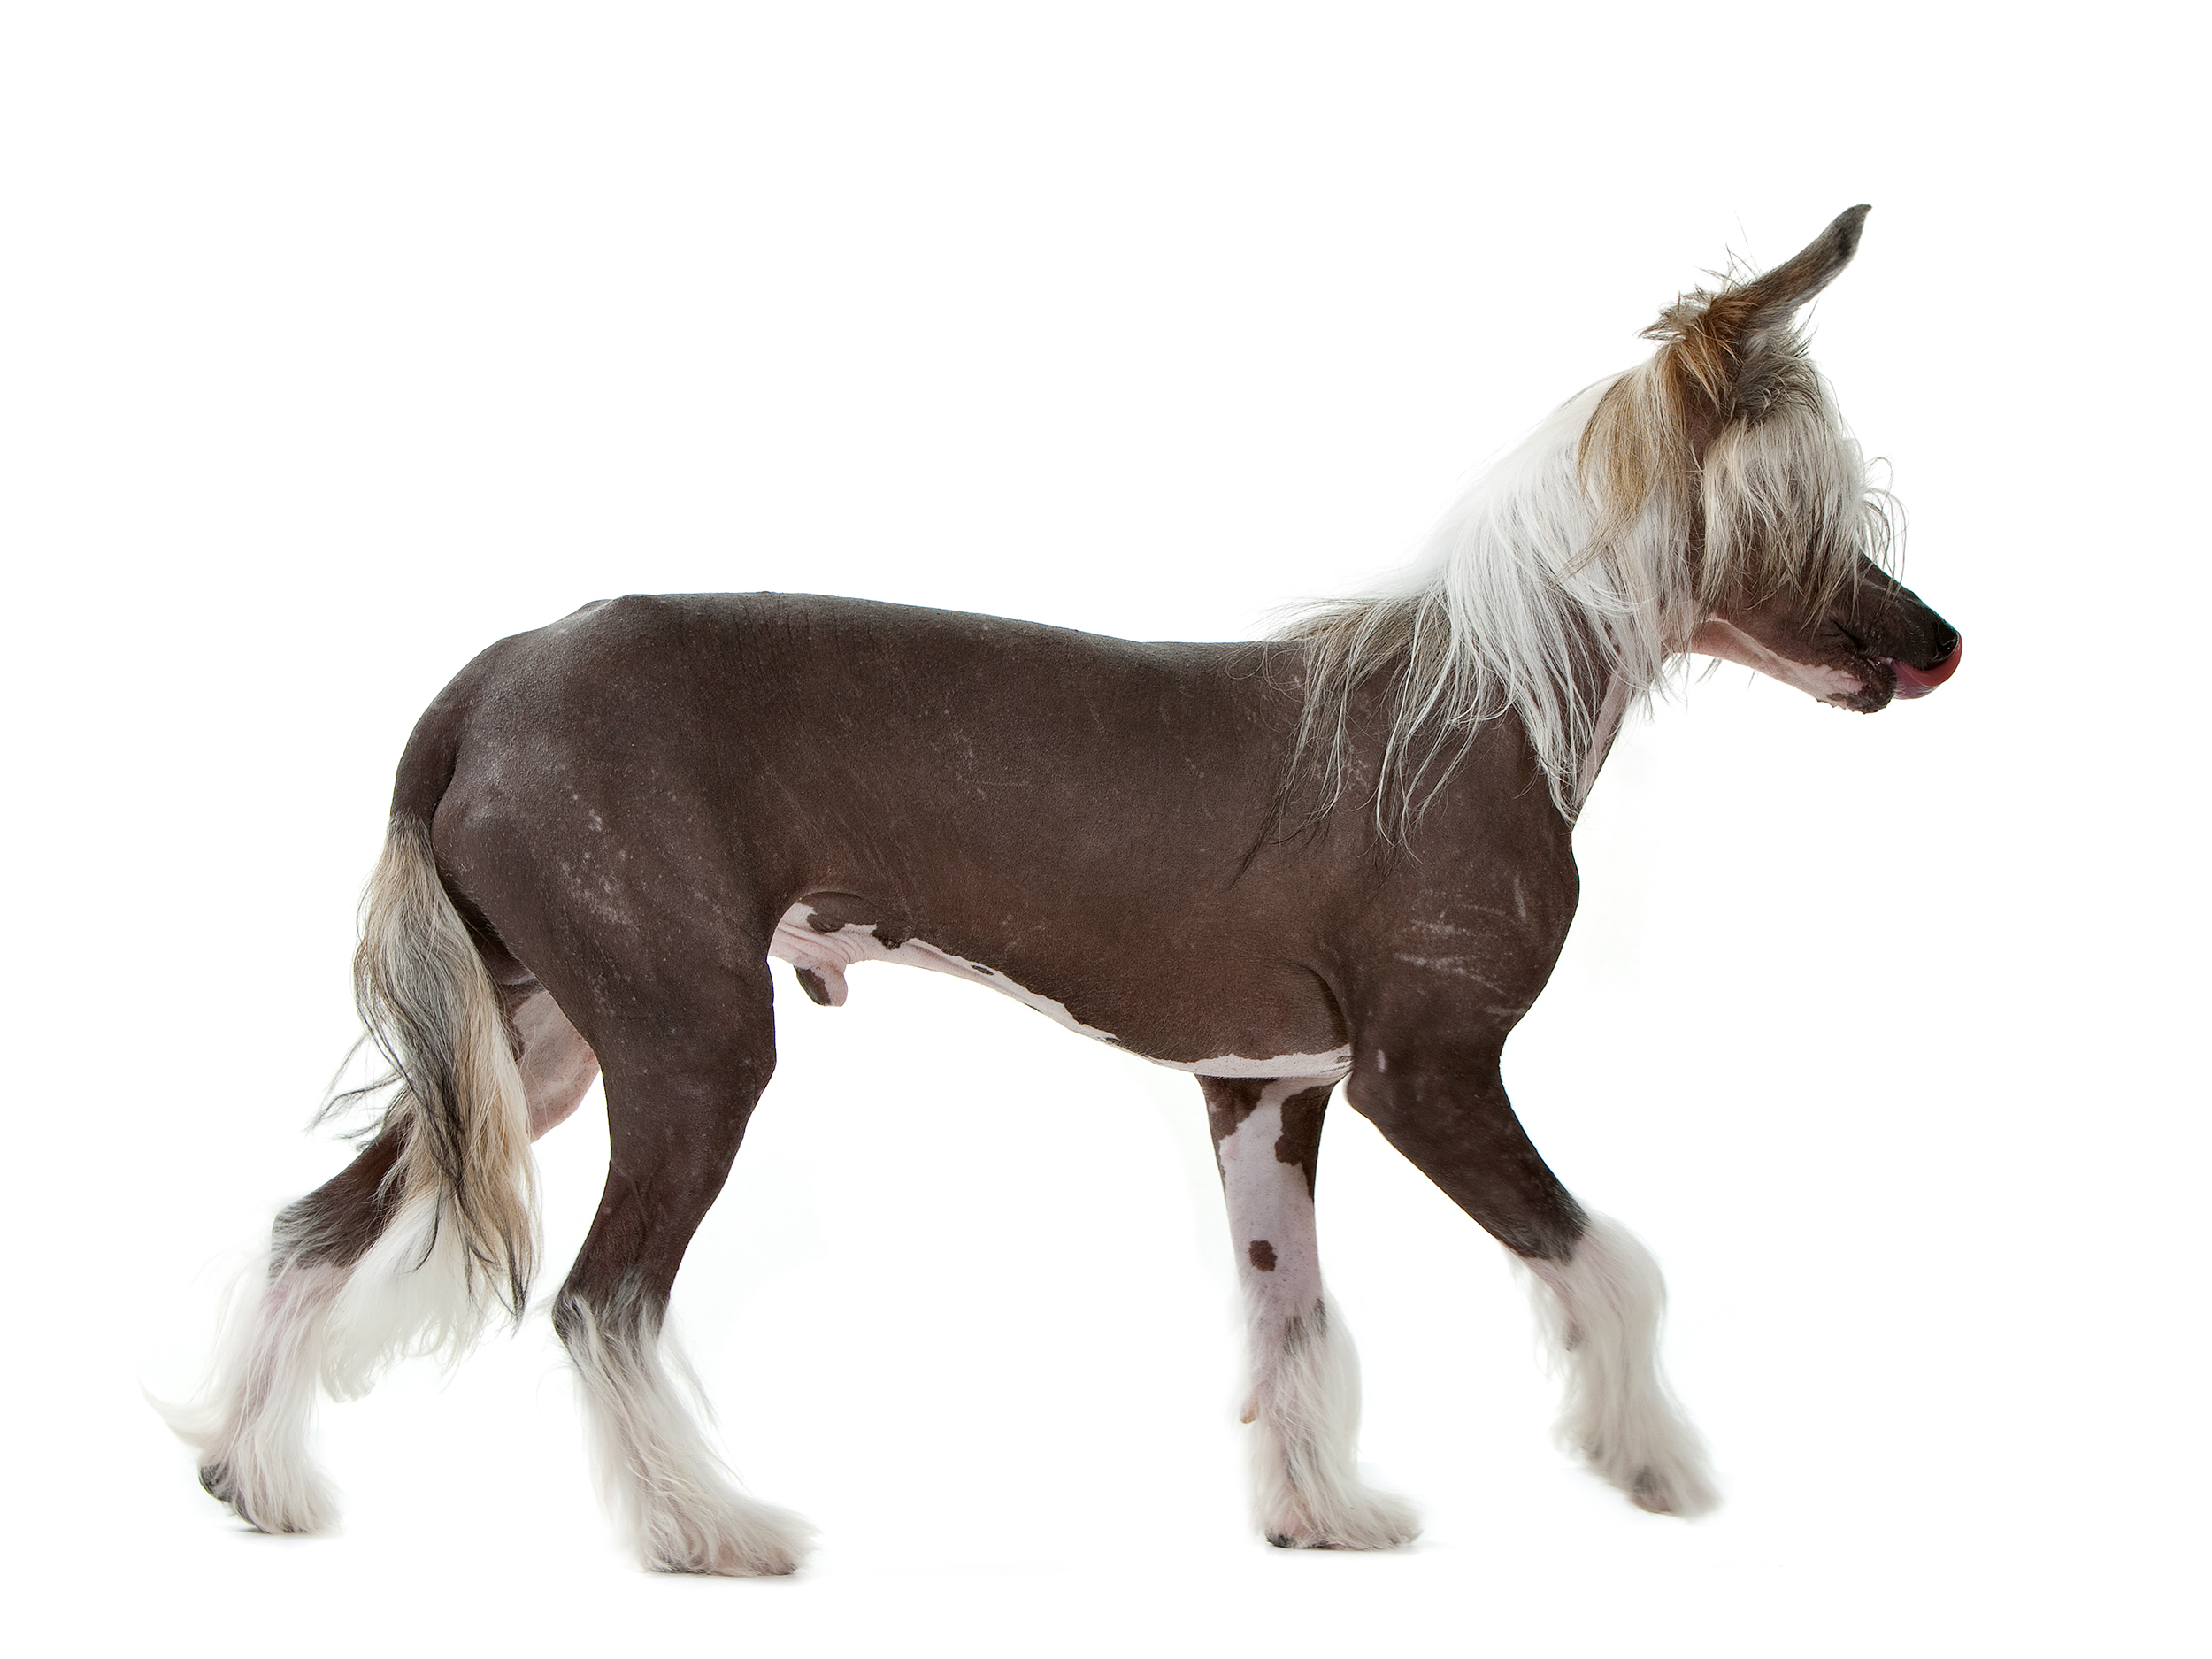 Chinese crested adult standing